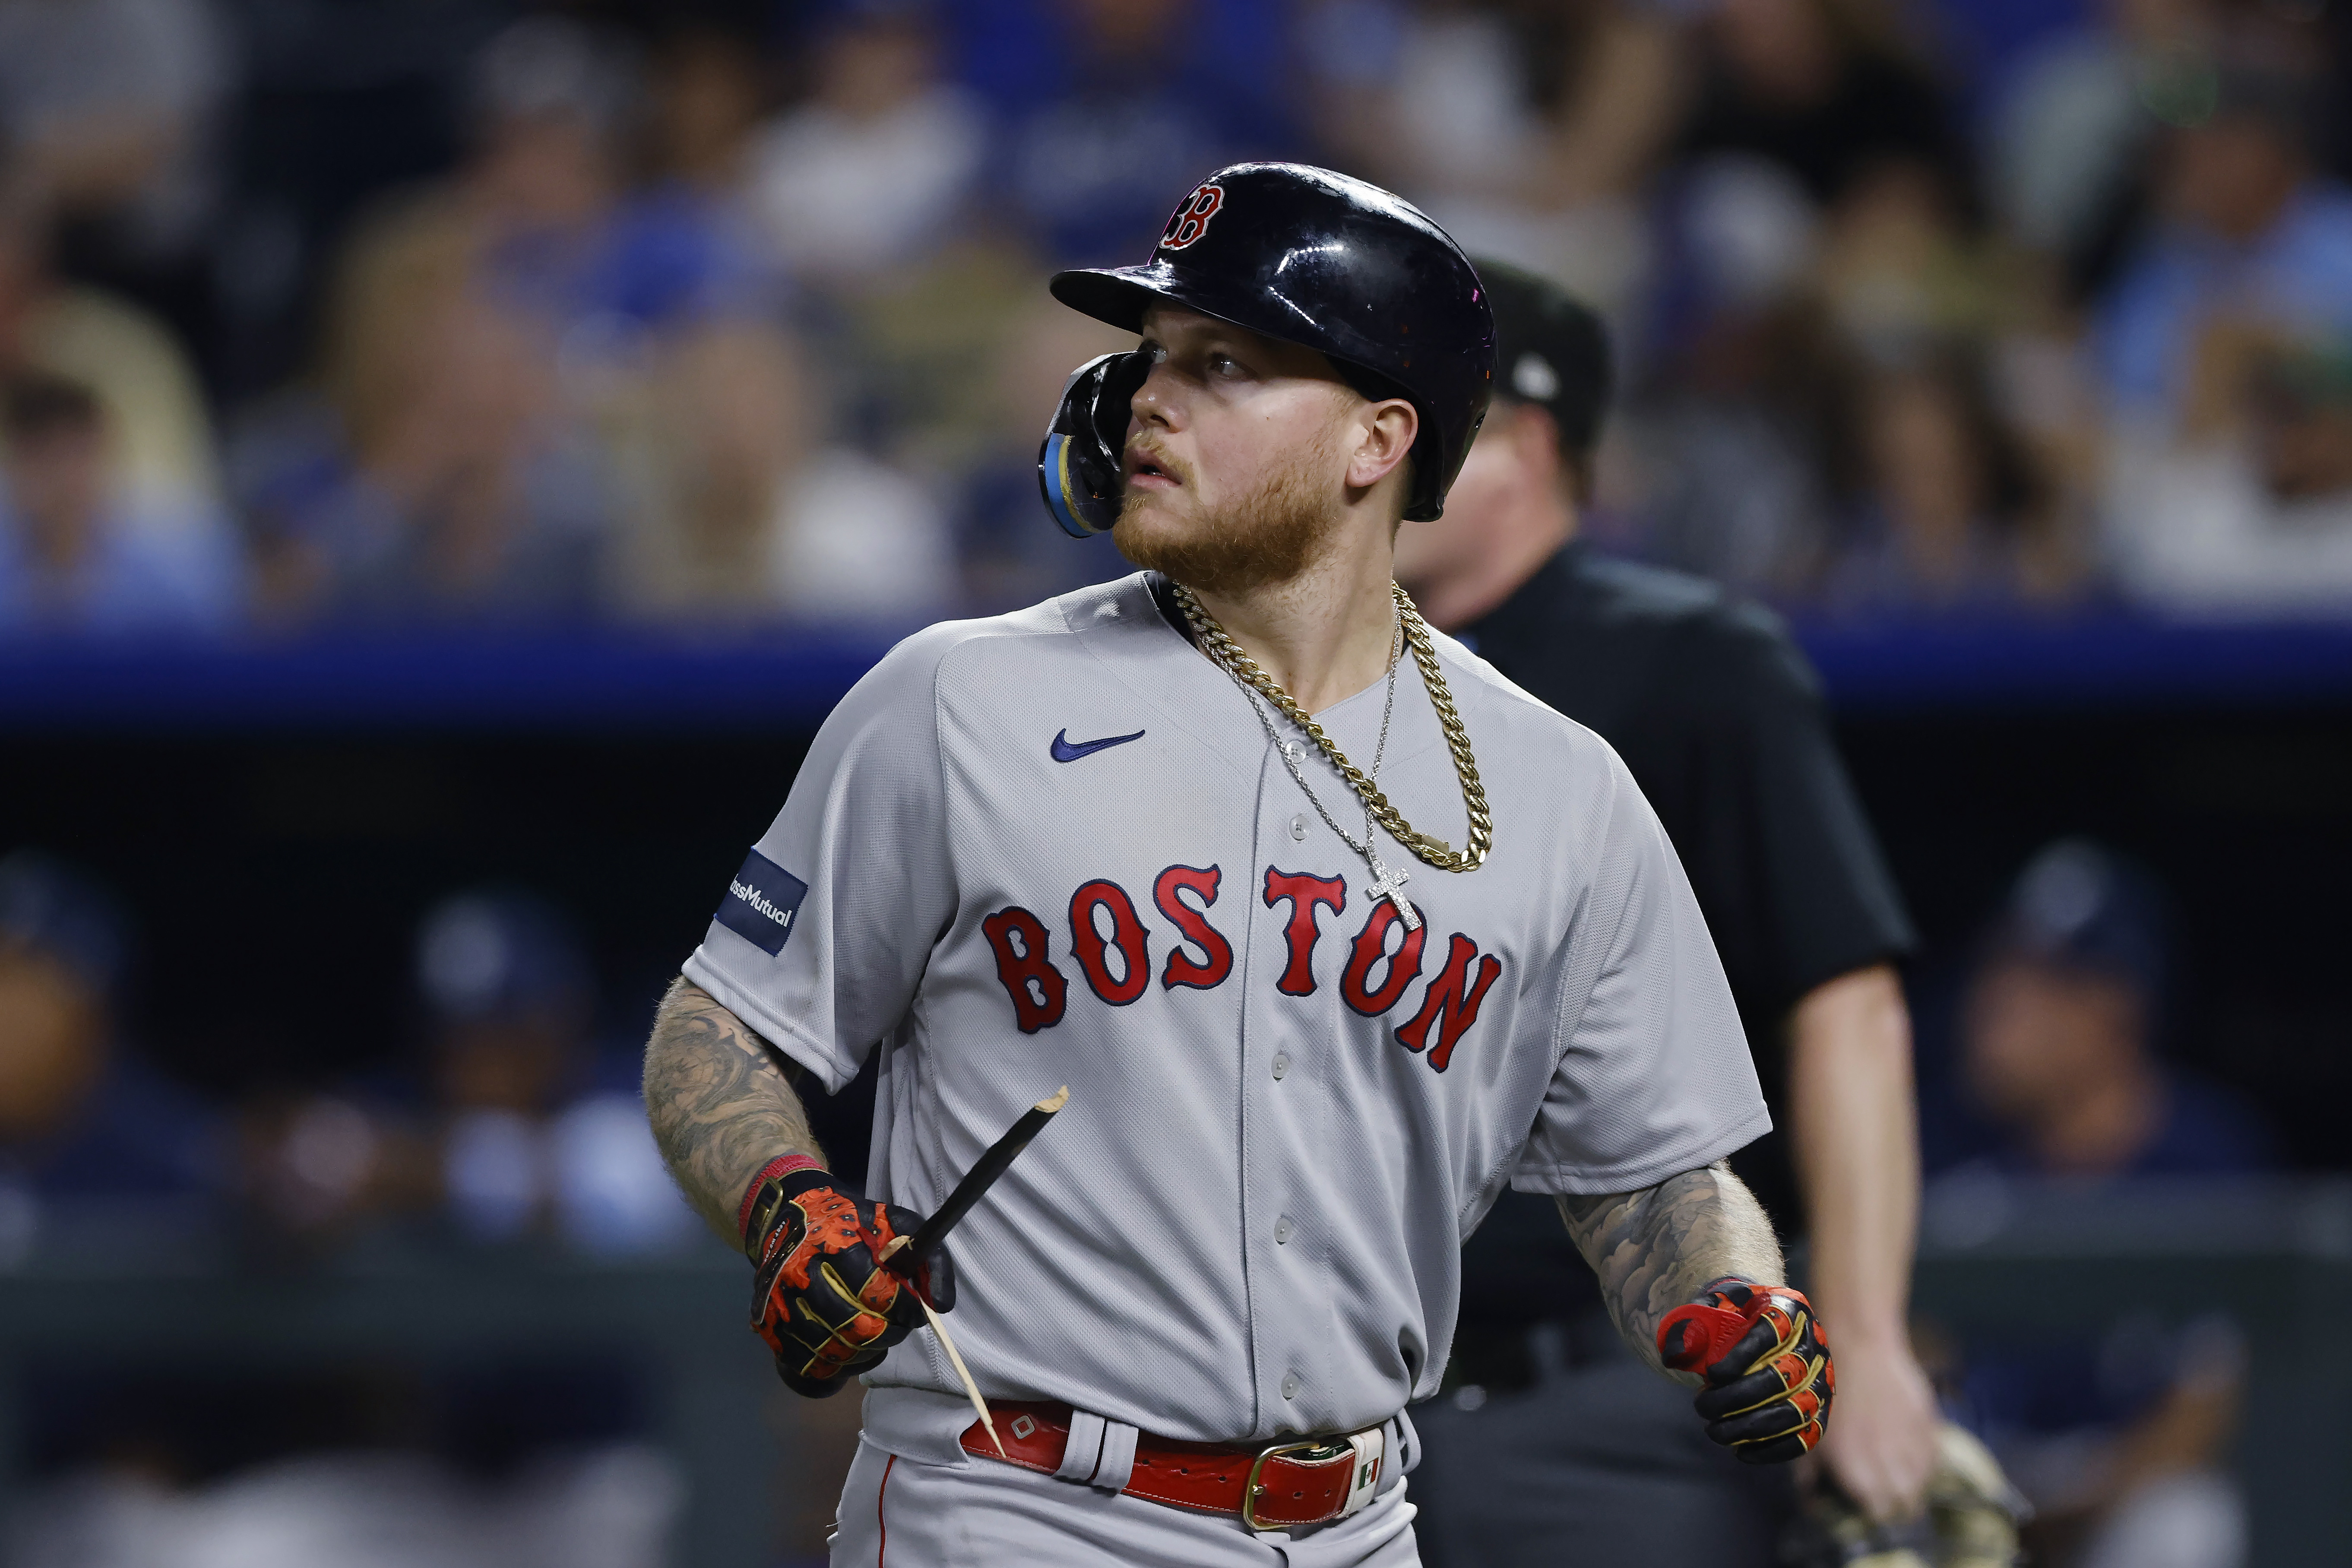 Dodgers Injury Update: Alex Verdugo 'Very Unlikely' To Be On